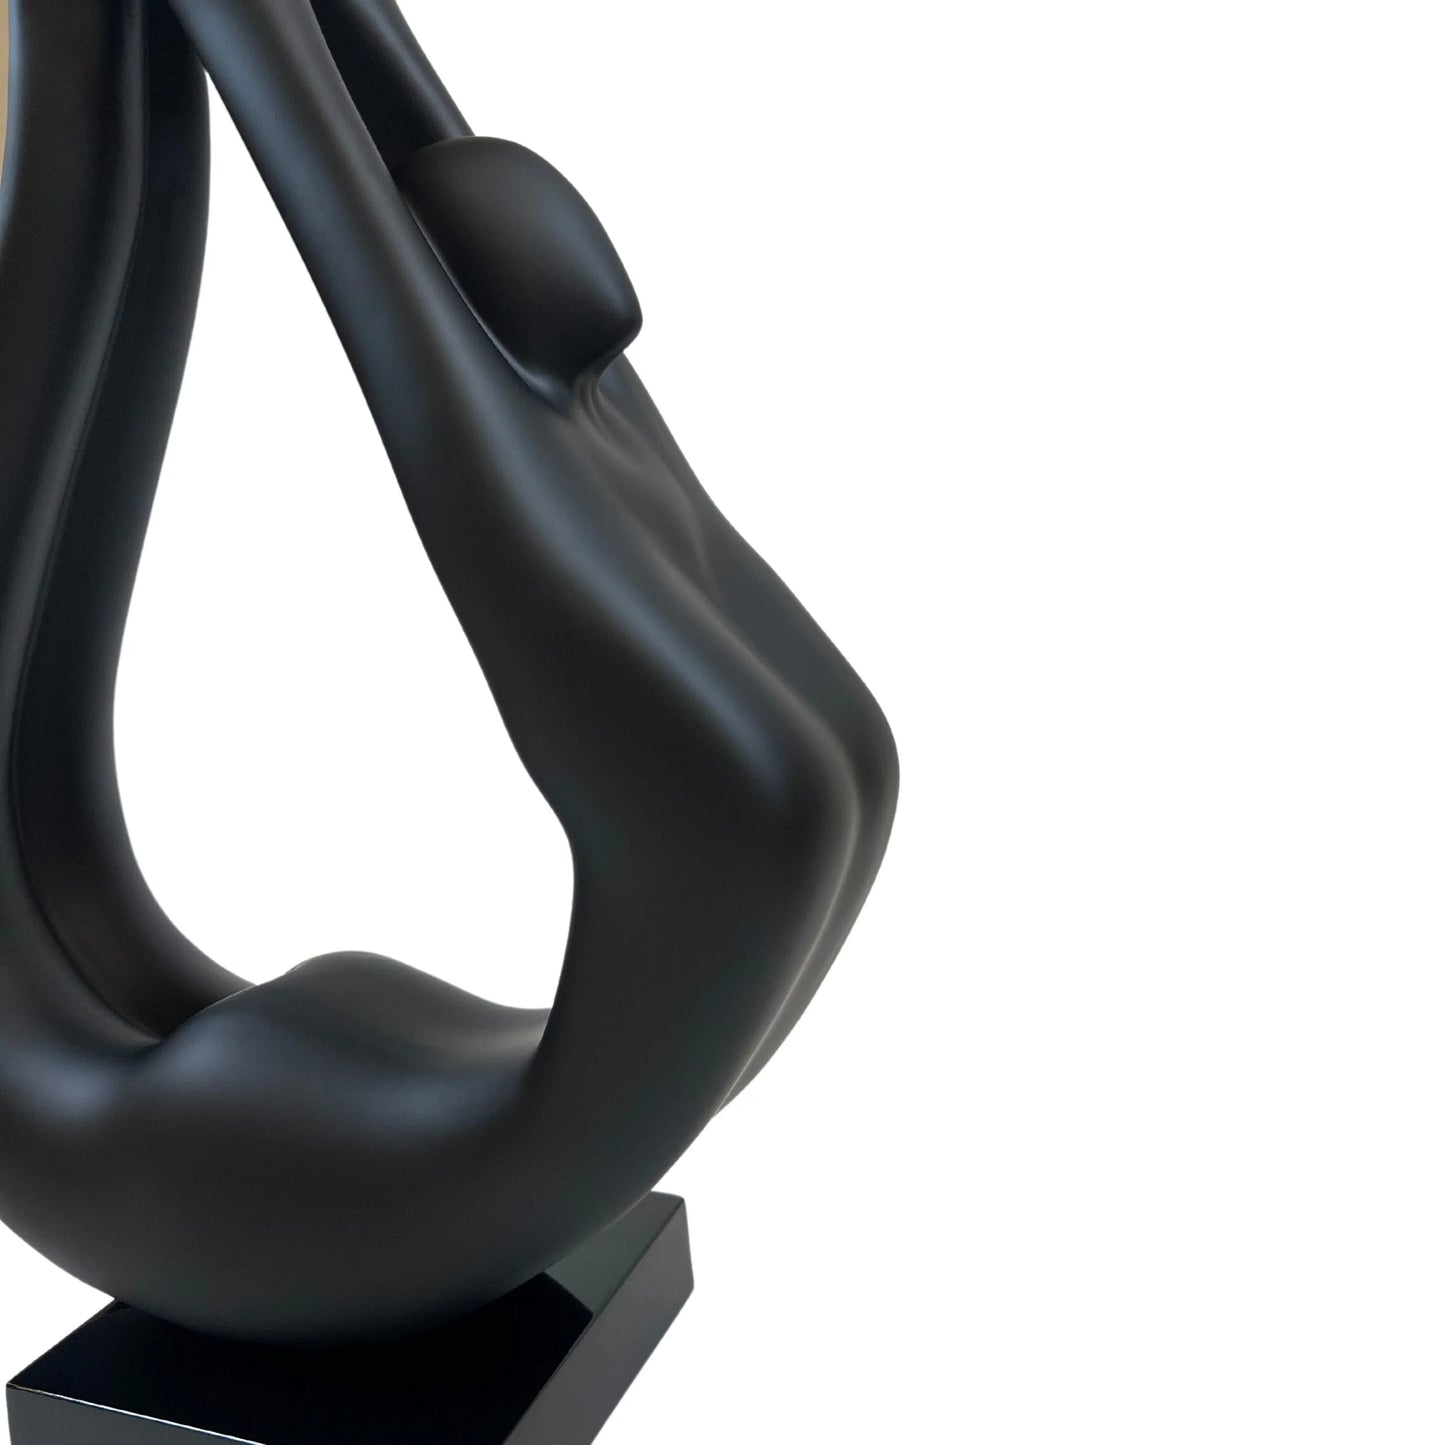 Finesse Decor Yoga Black Sculpture with Wood Base 6